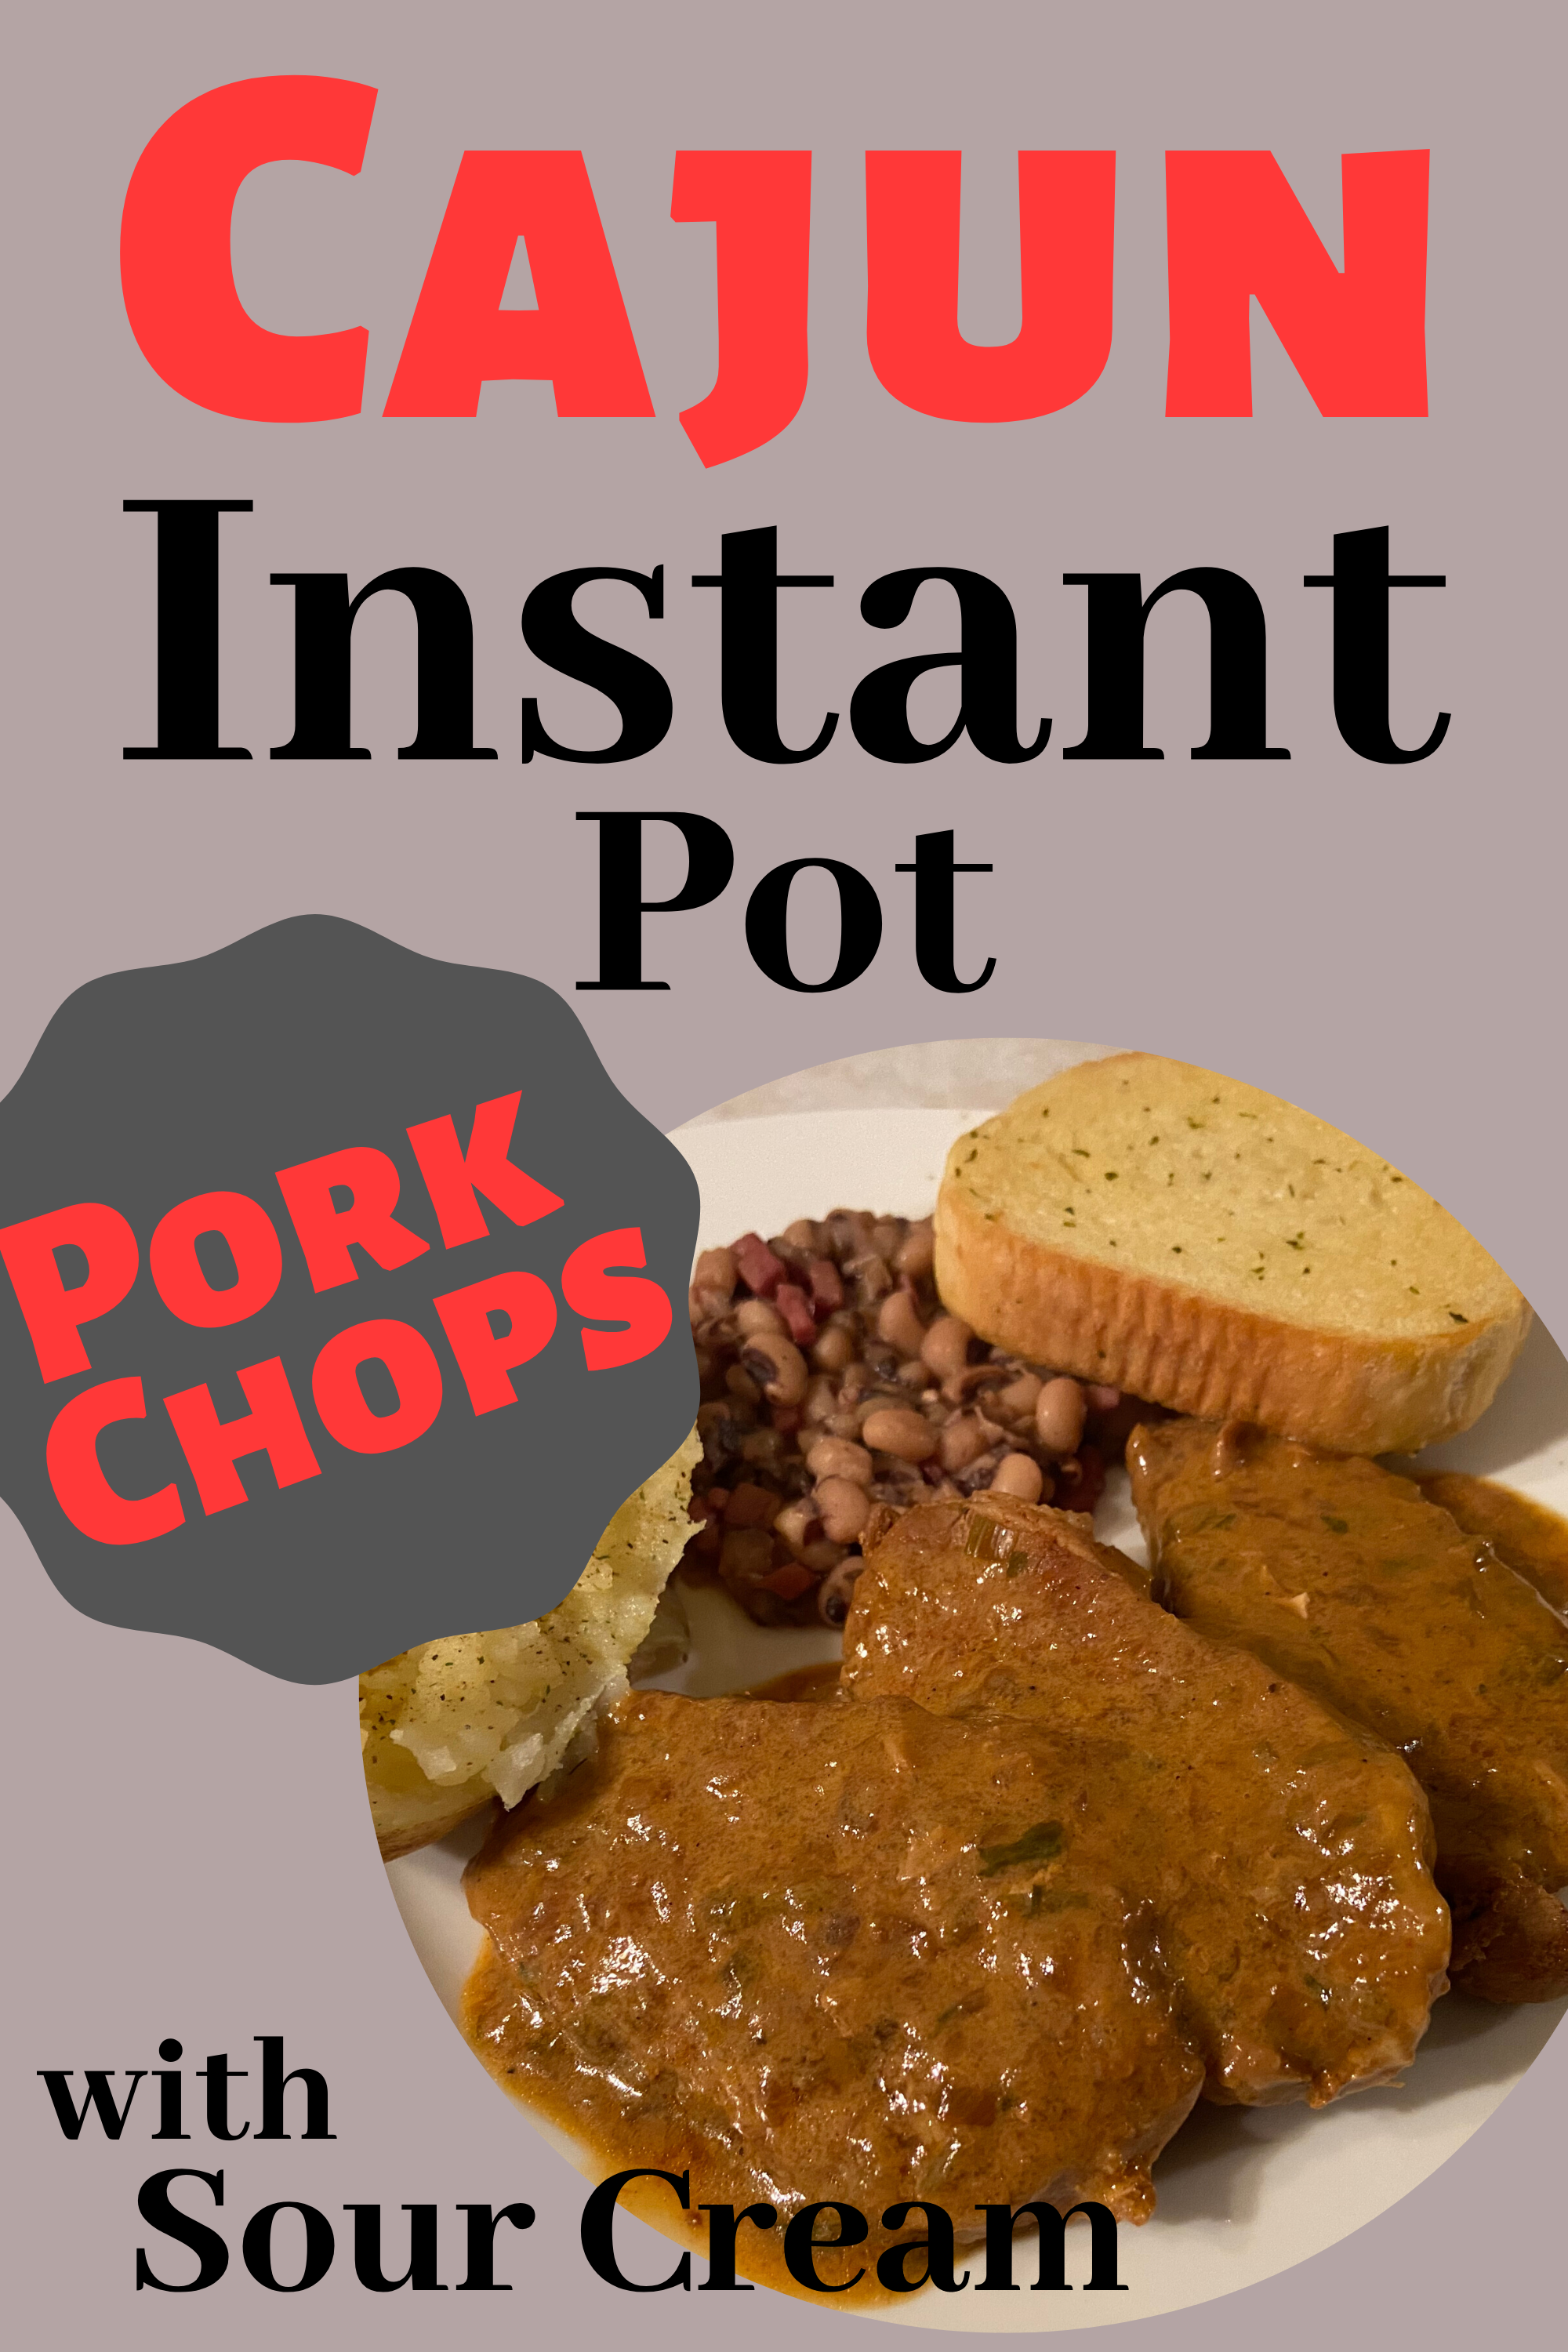 A white plate with boneless pork chops covered in gravy with a baked potato, black eyed peas, and a garlic bread.